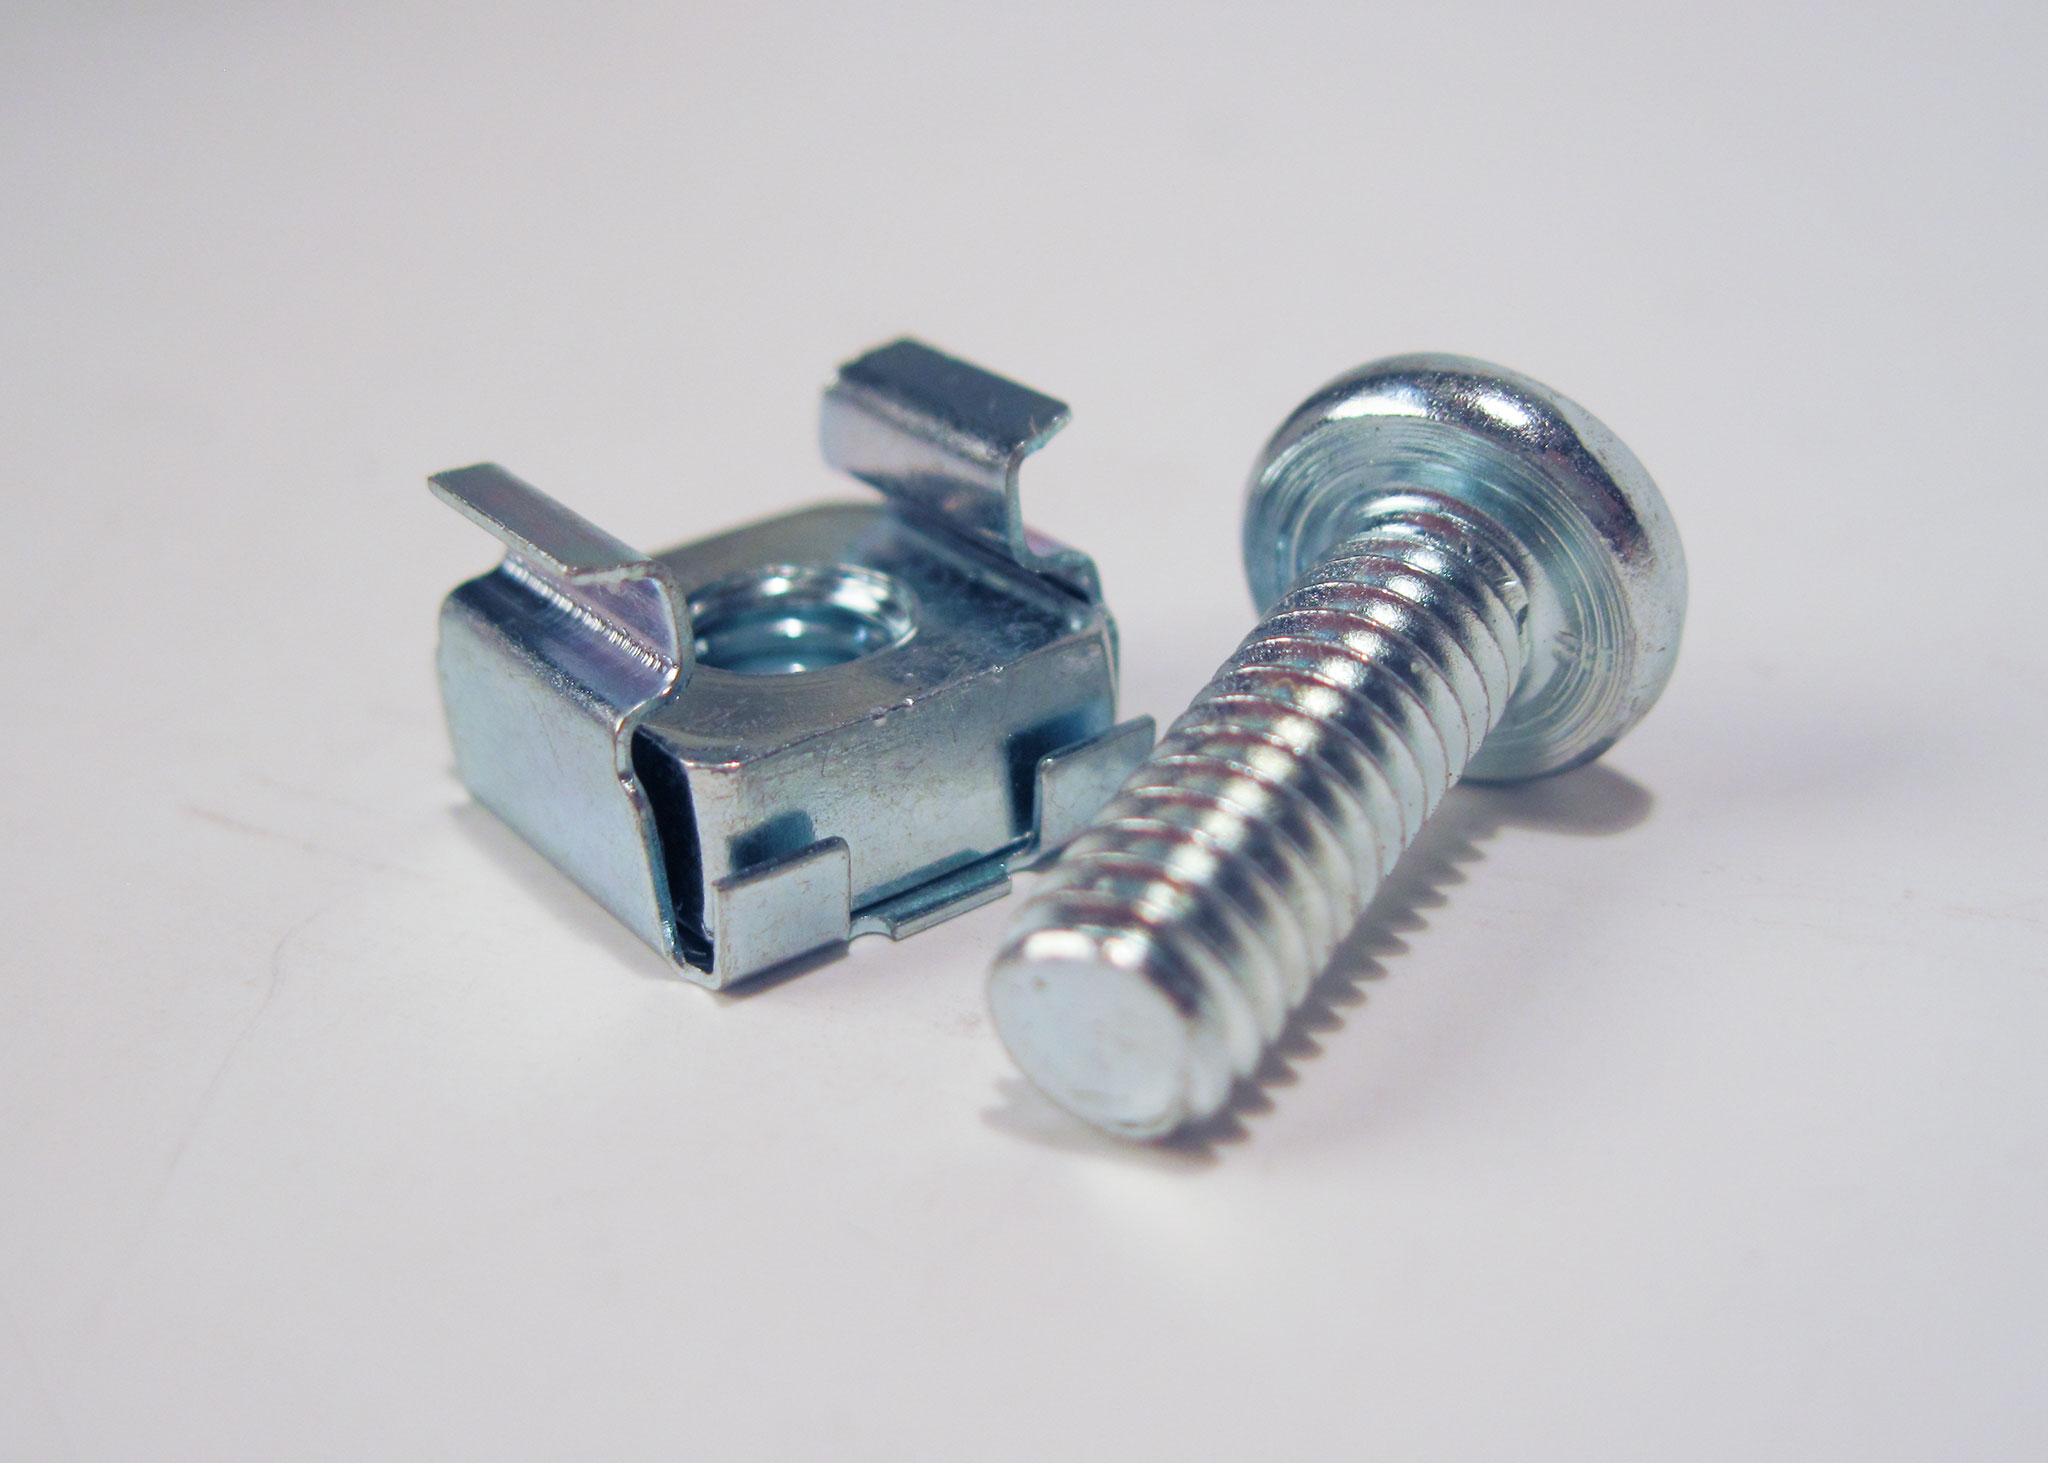 12-24 cage nut and rack screw